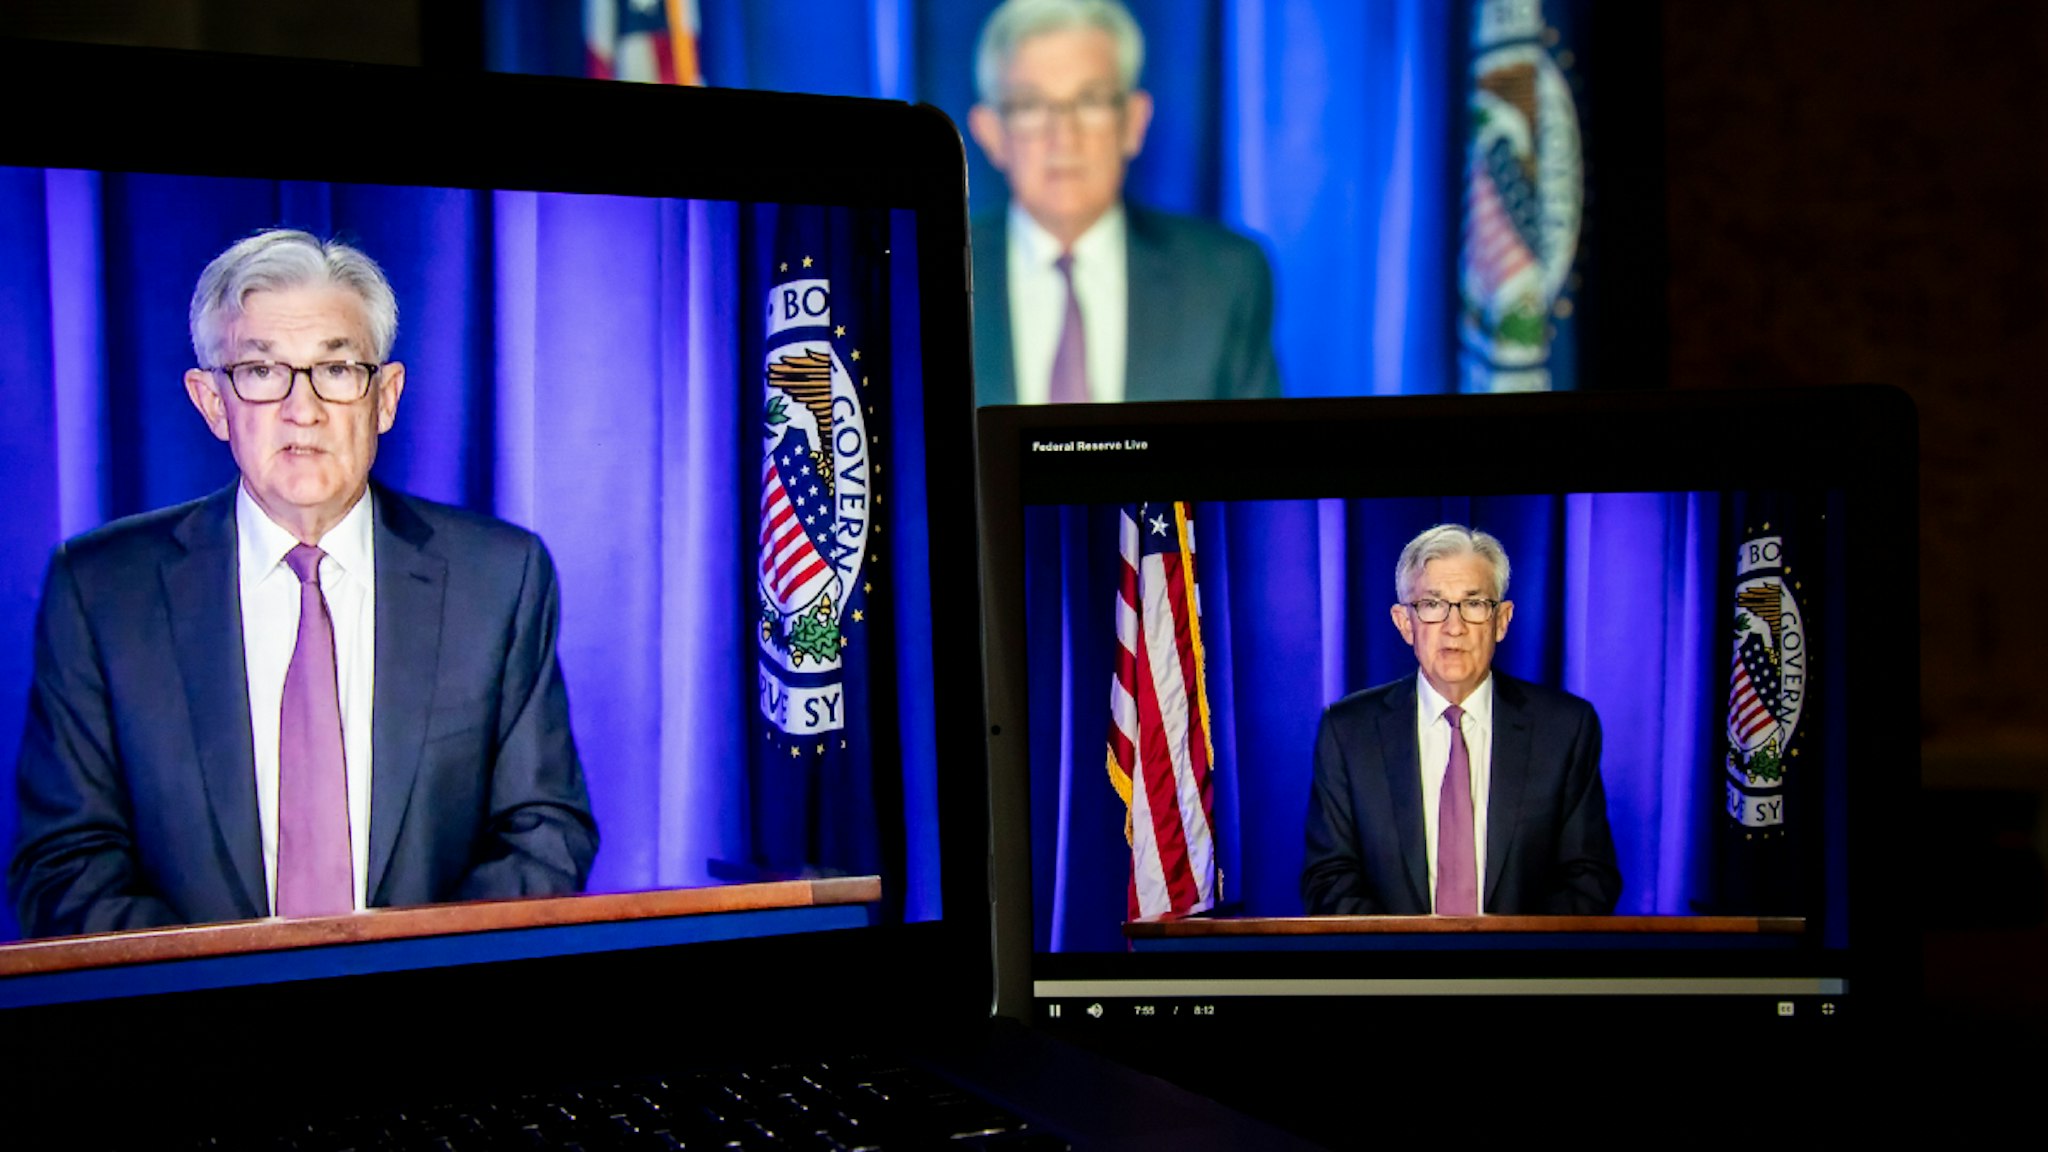 Jerome Powell, chairman of the U.S. Federal Reserve, speaks during a live-streamed news conference following a Federal Open Market Committee (FOMC) meeting in New York, U.S., on Wednesday, March 16, 2022.